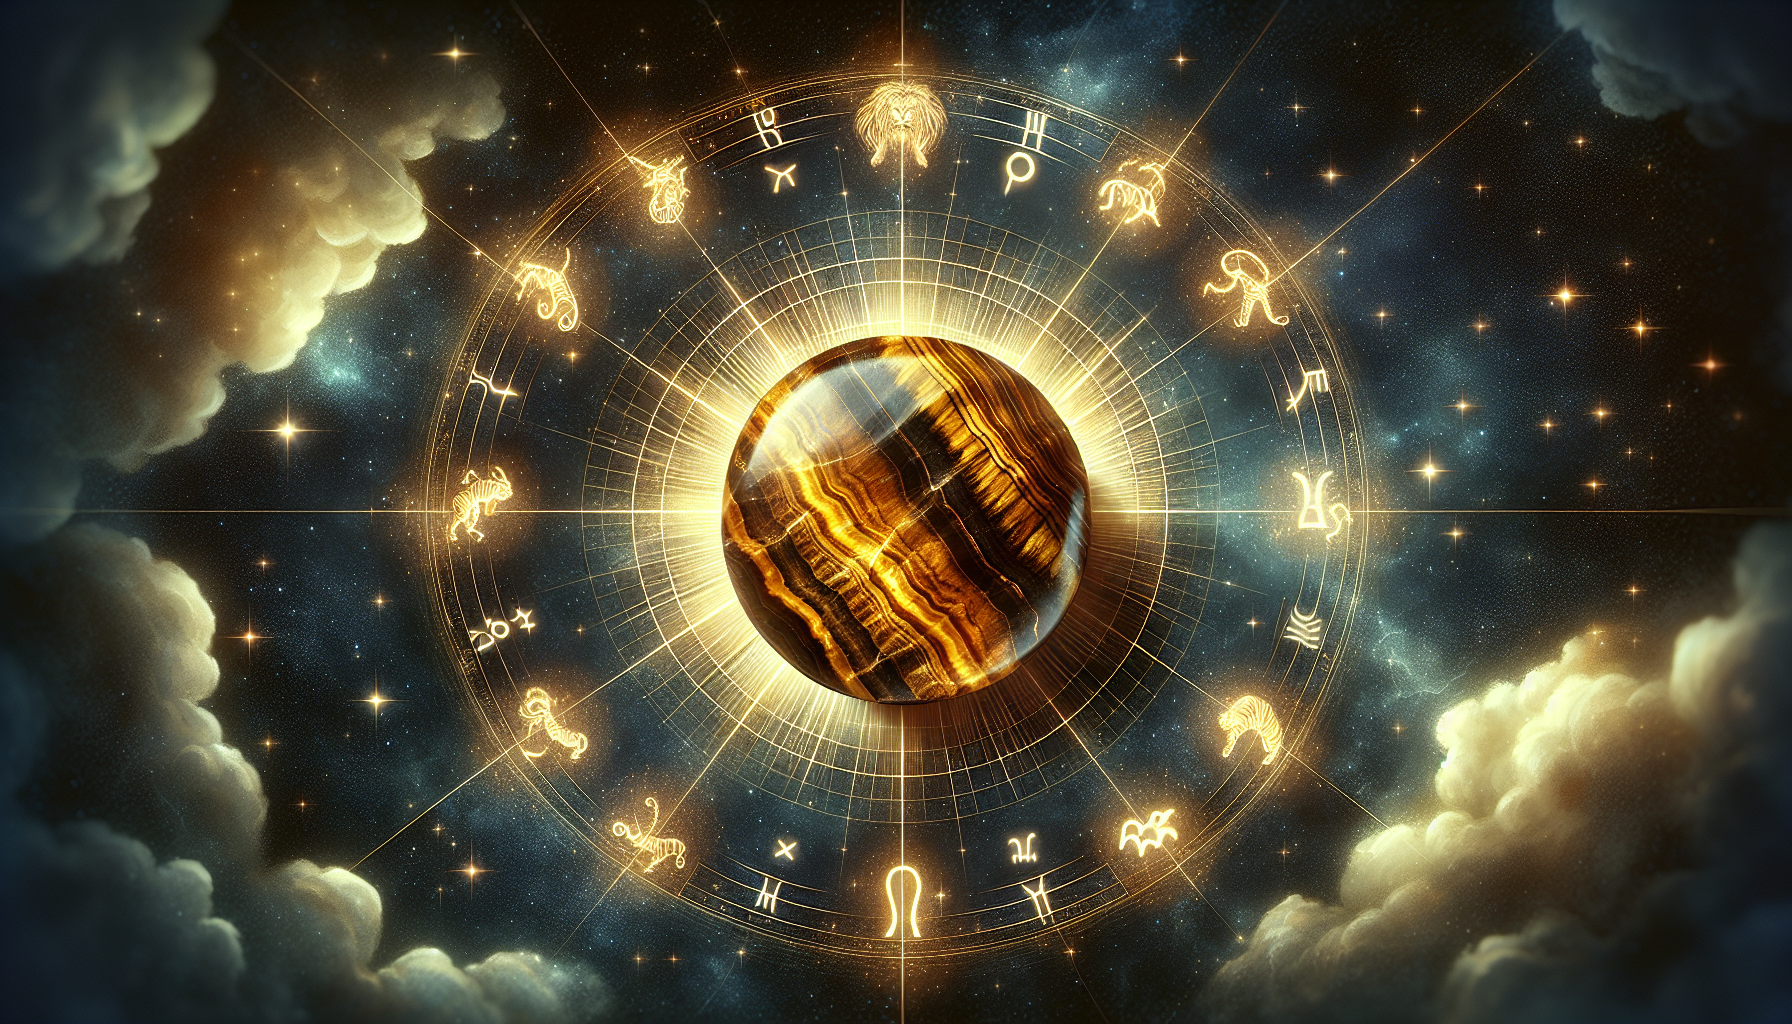 Illustration of zodiac signs and tiger eye stone